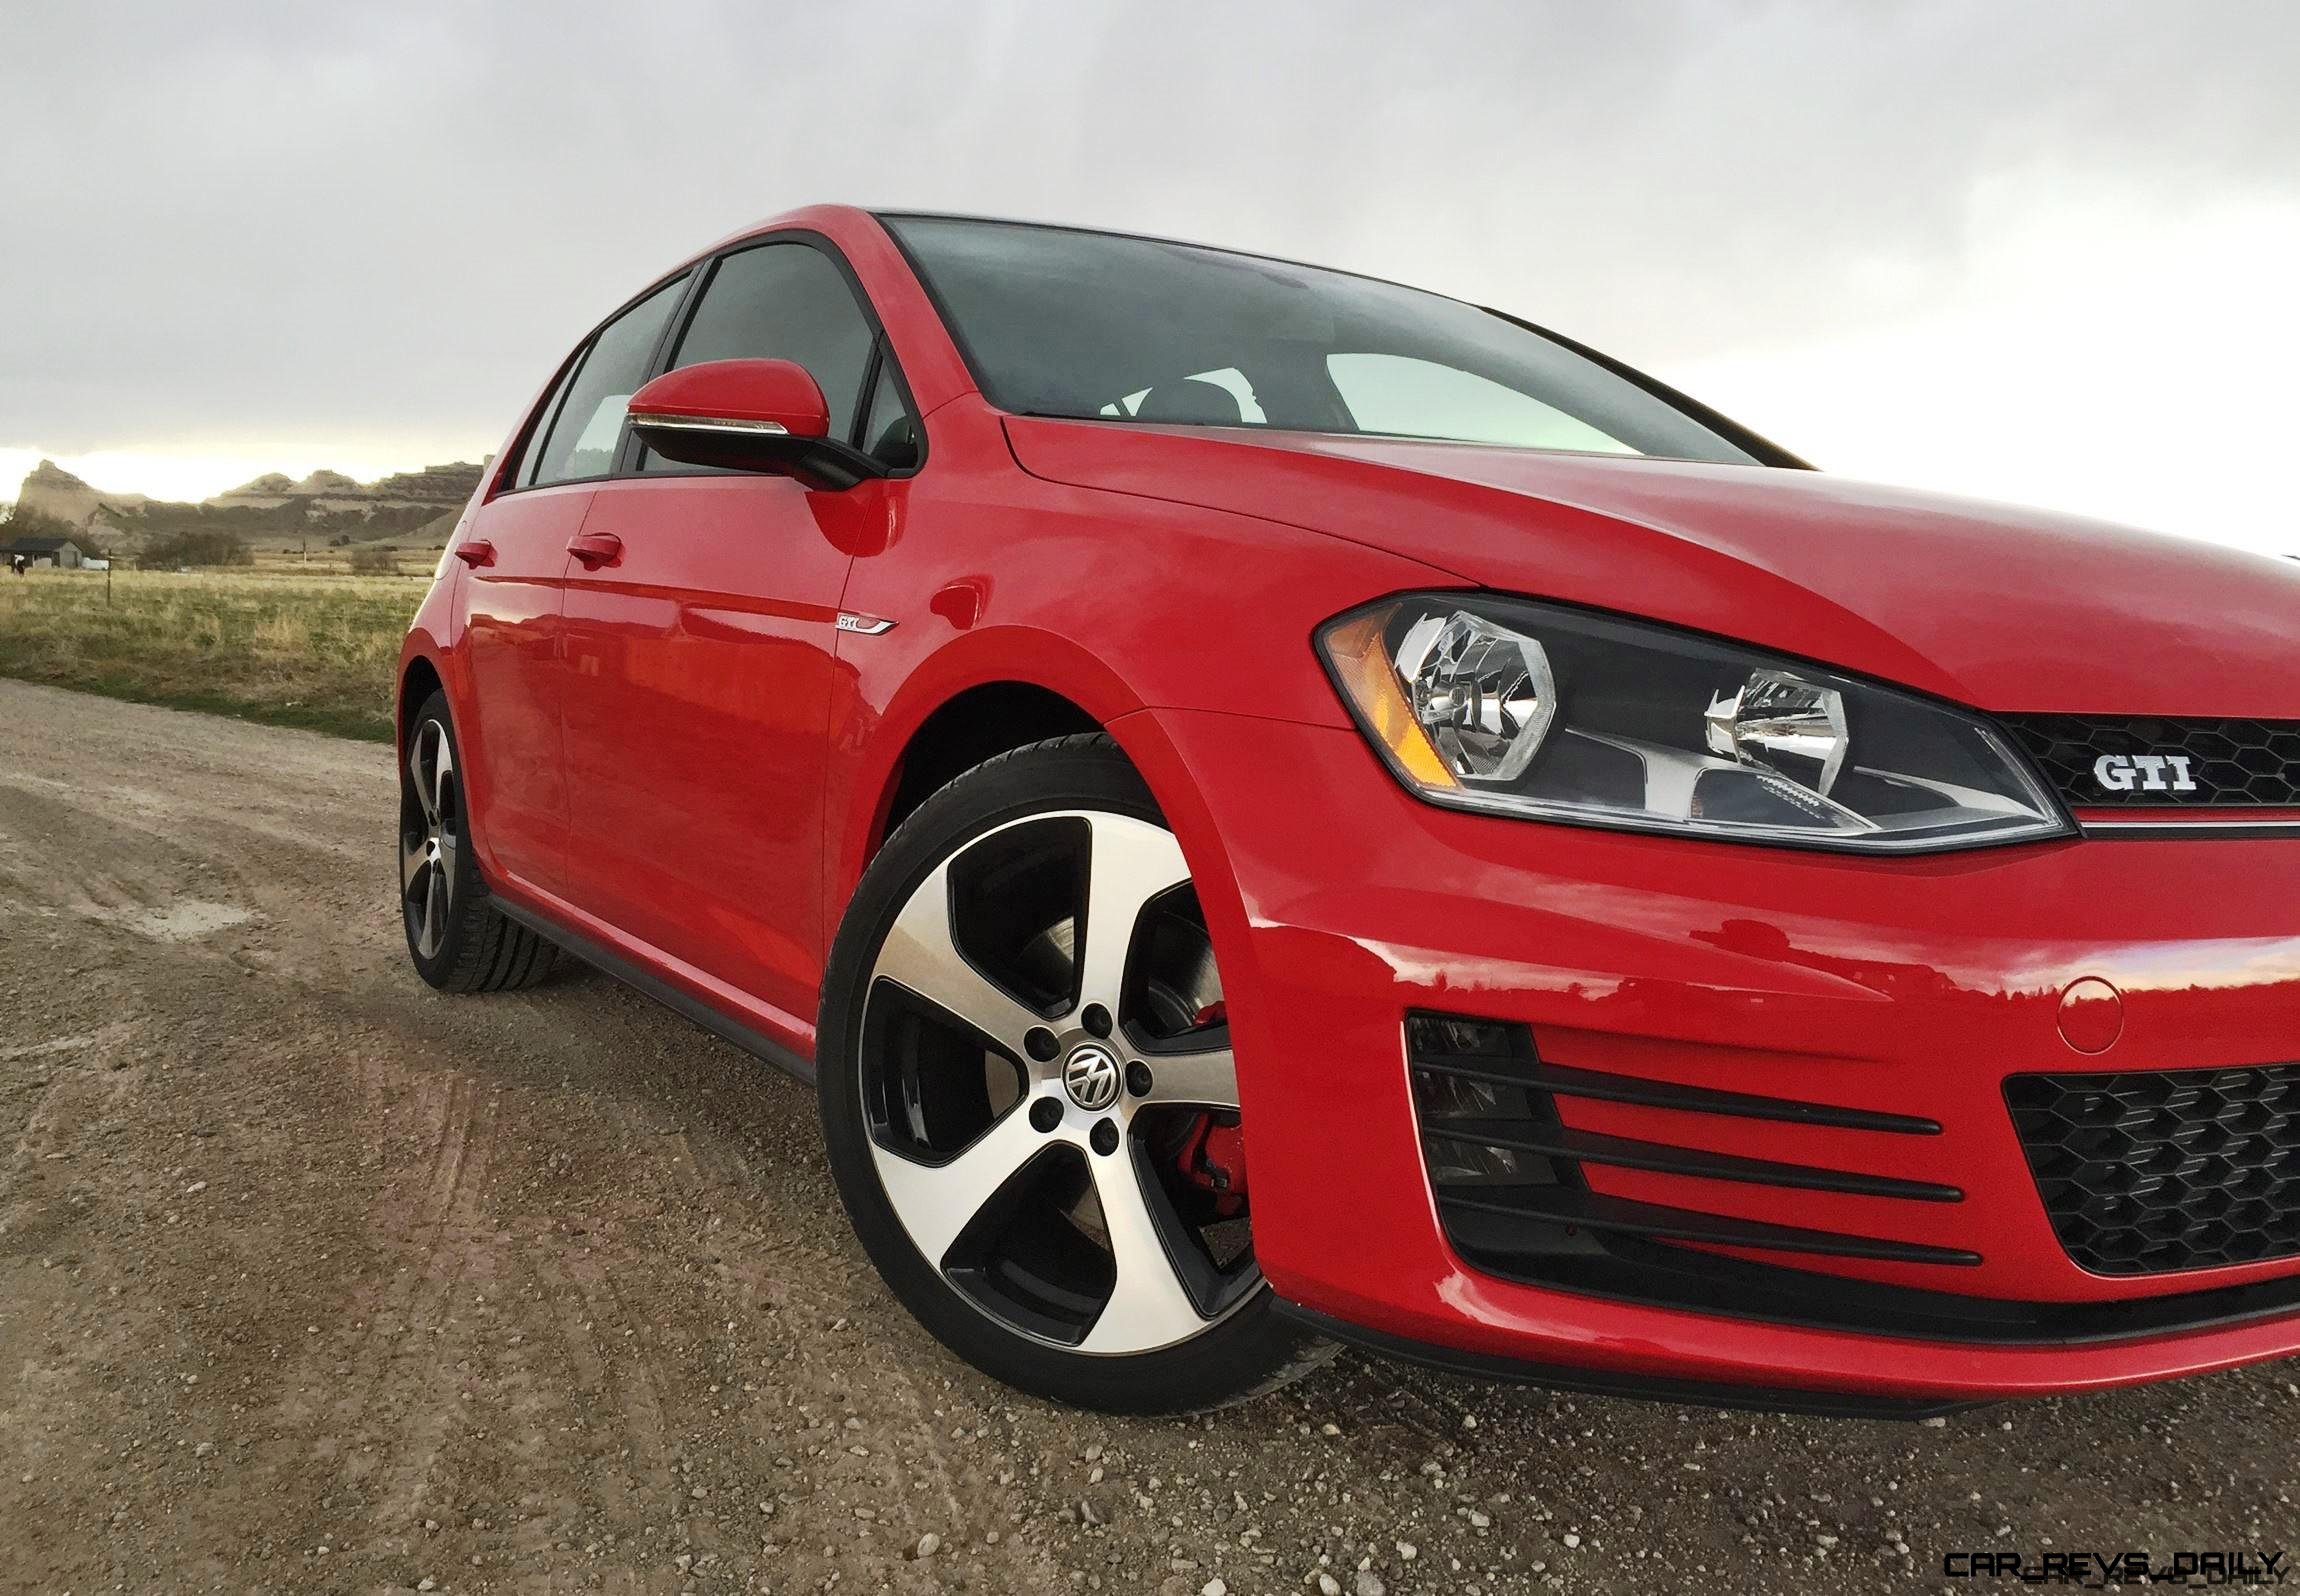 Road Test Review 16 Volkswagen Golf Gti Autobahn 6 Speed By Tim Esterdahl Car Shopping Car Revs Daily Com